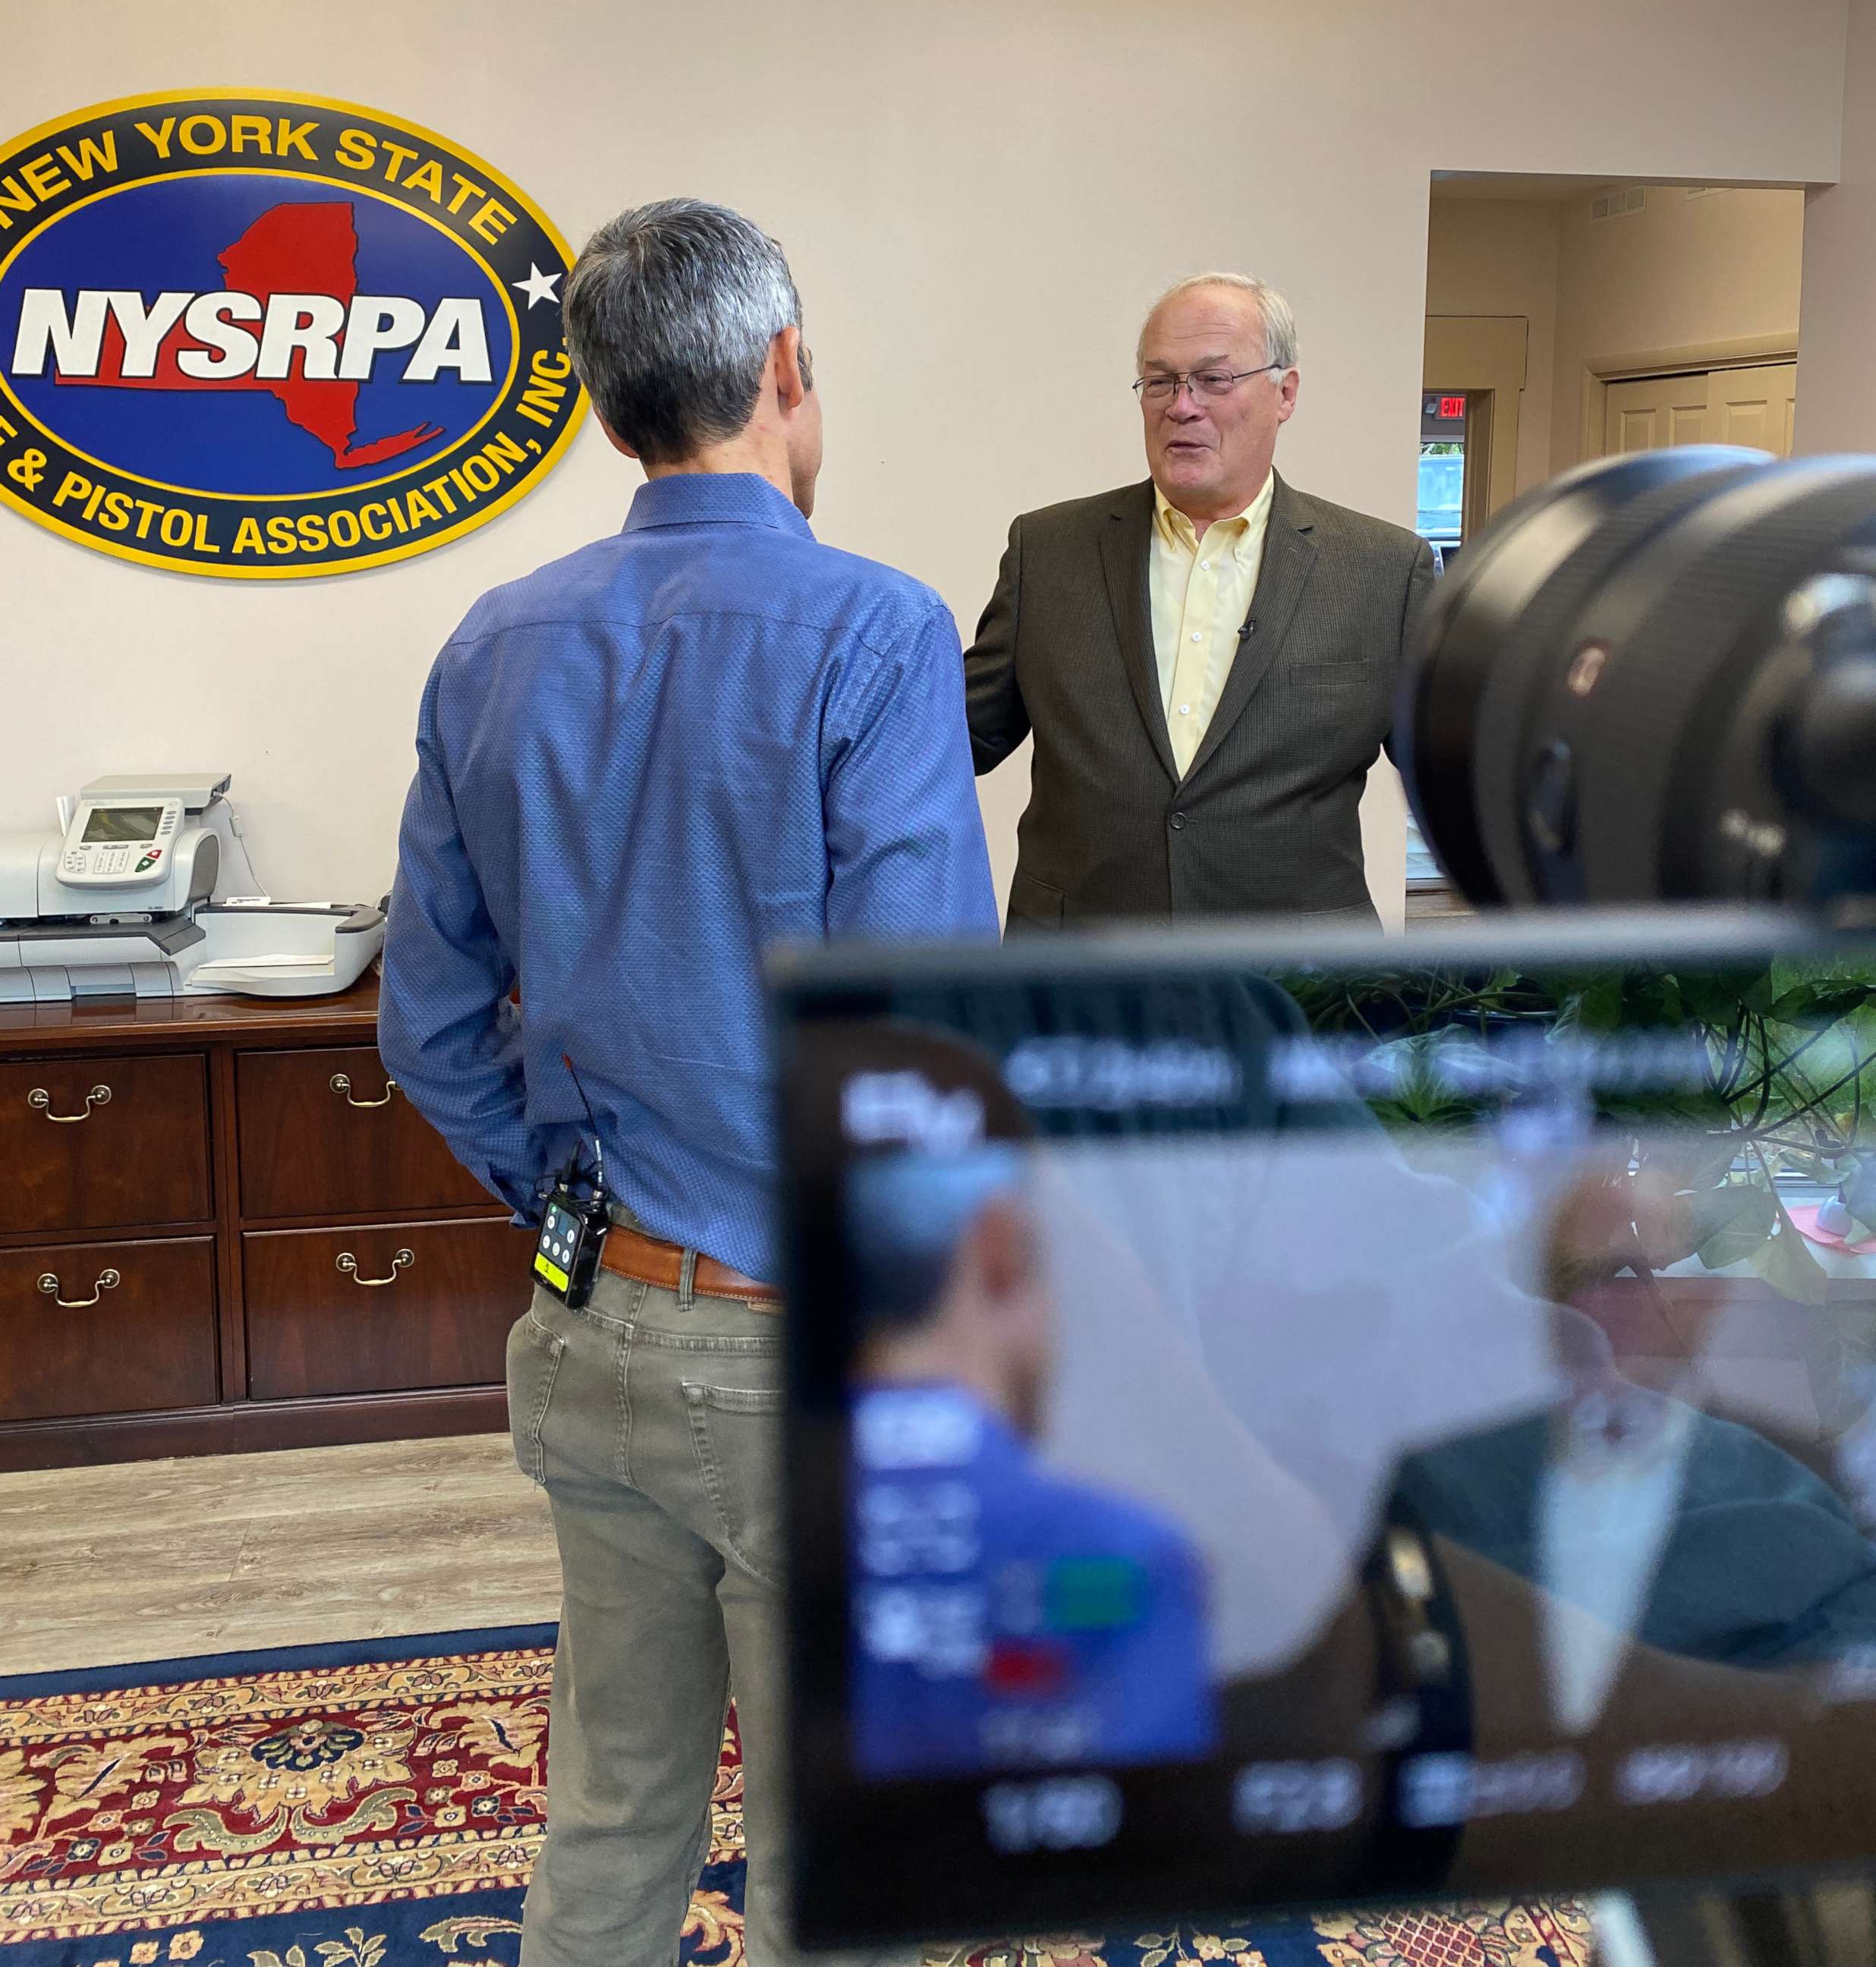 PHOTO: Tom King, president of the New York State Rifle and Pistol Association, is suing the state over its law restricting concealed carry permits to only those residents who can prove a "proper cause."